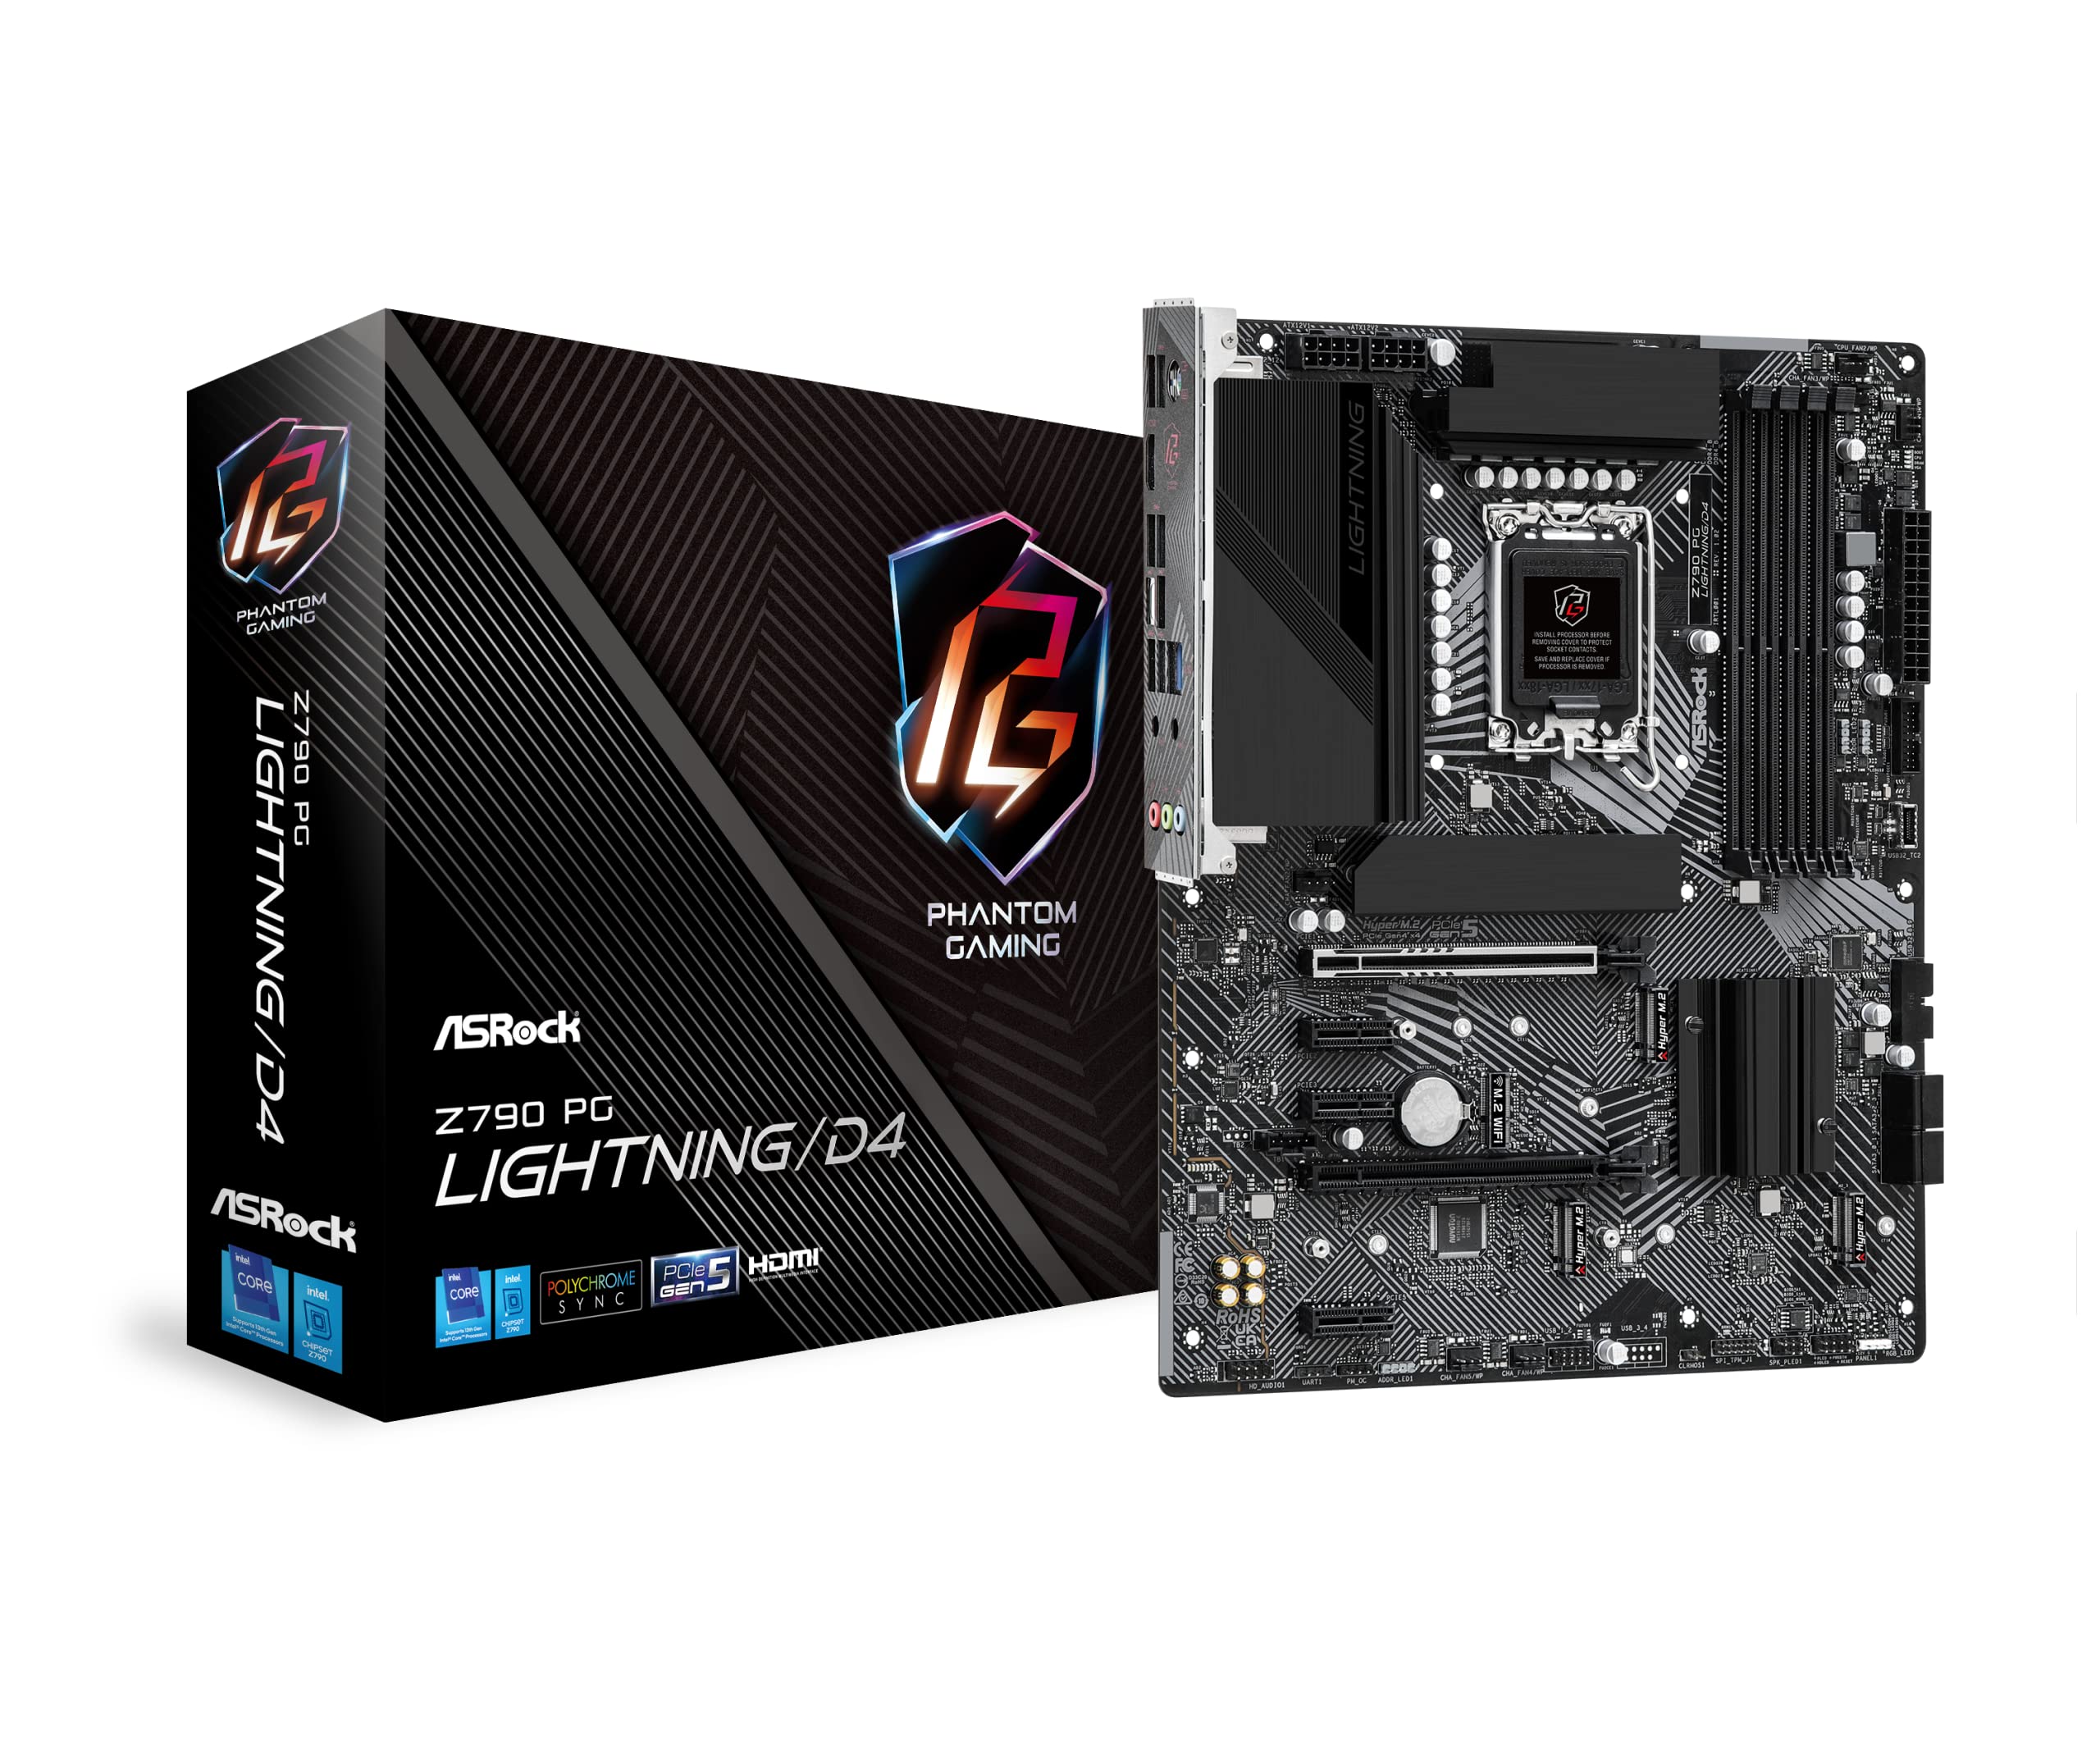 ASRock Z790 PG Lightning/D4 Motherboard, Supports Intel 12th and 13th Generation CPU (LGA1700), Z790 Chipset, DDR4 ATX Motherboard for $169.99